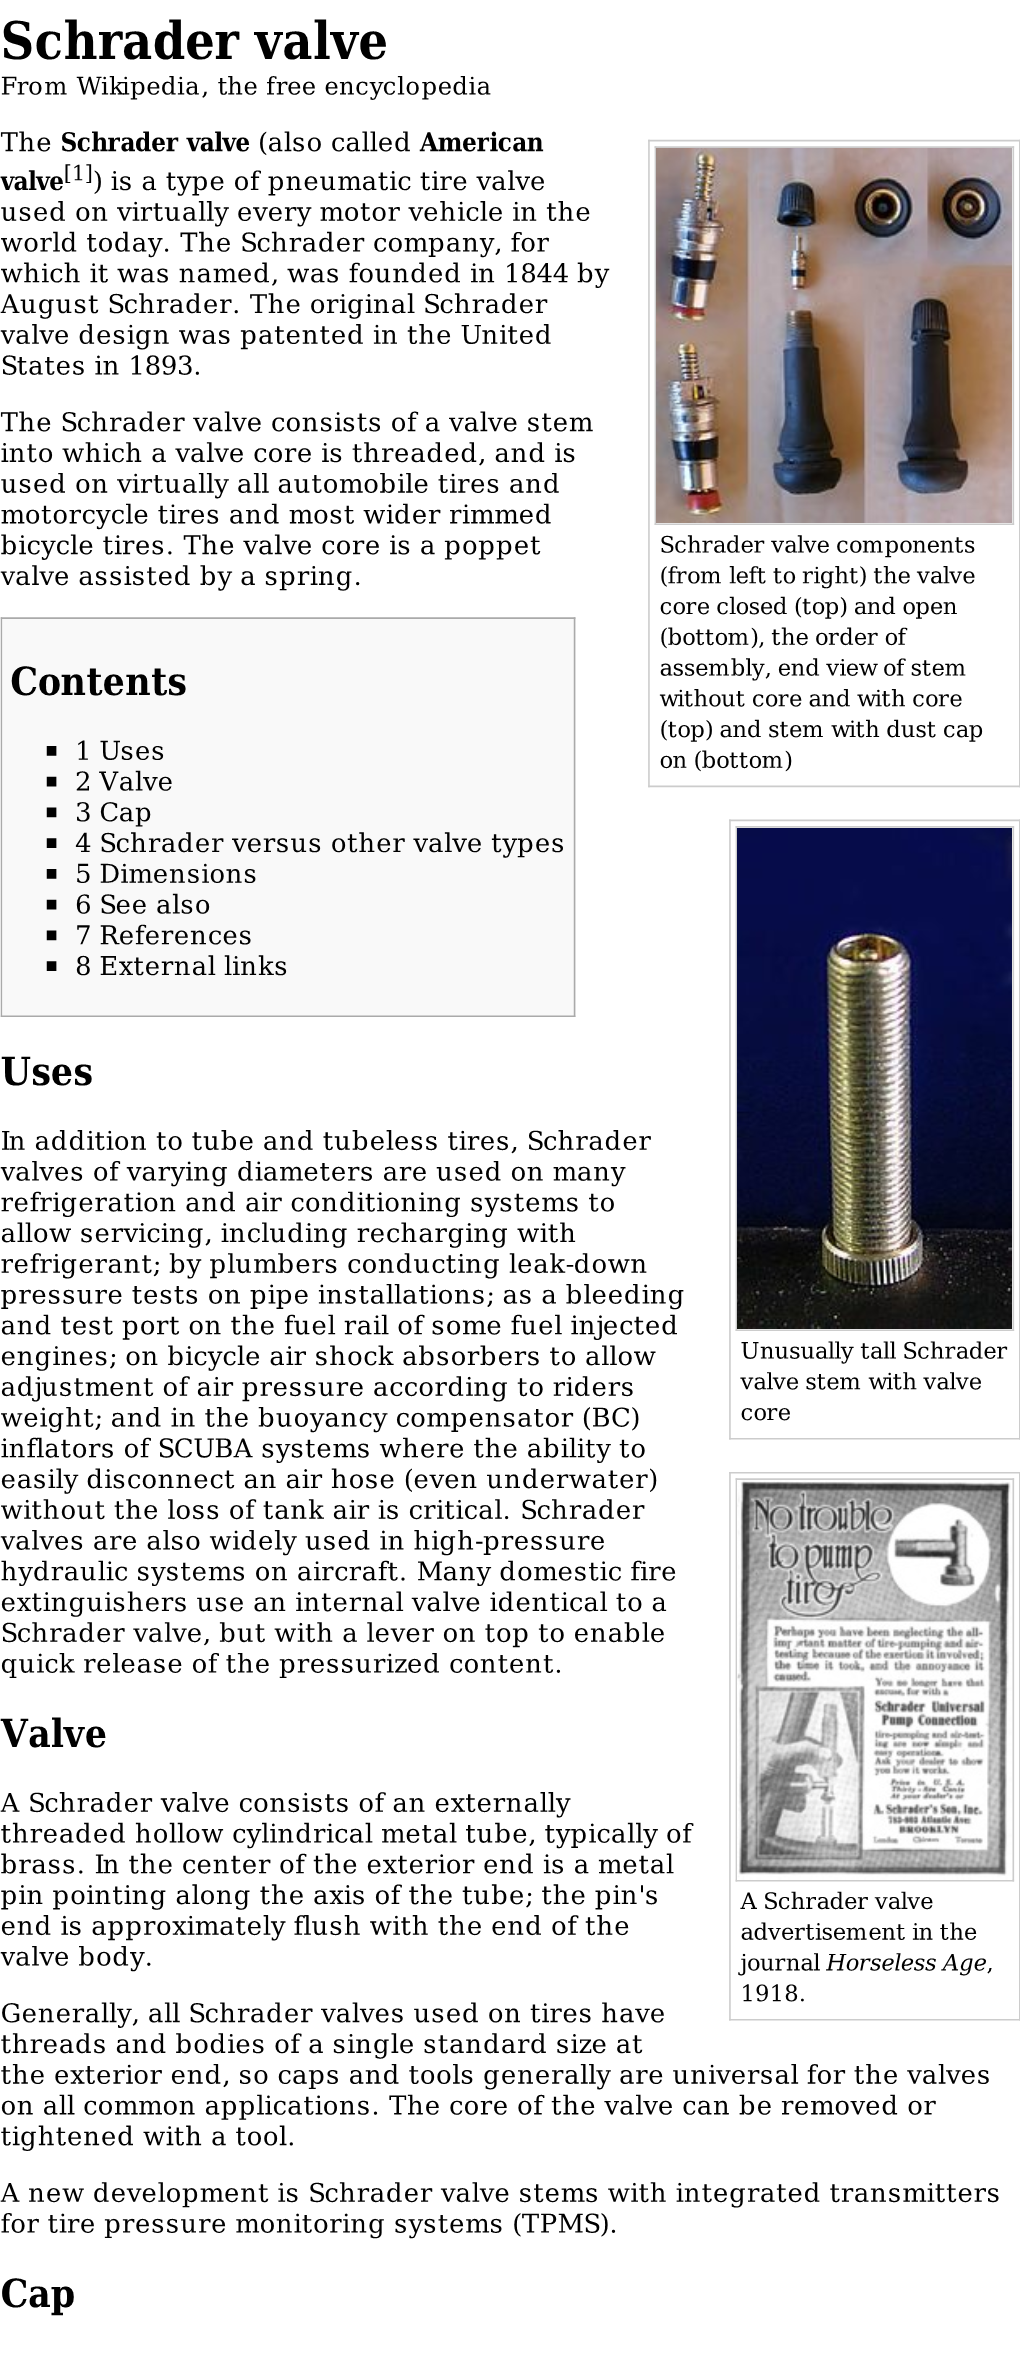 Schrader Valve from Wikipedia, the Free Encyclopedia